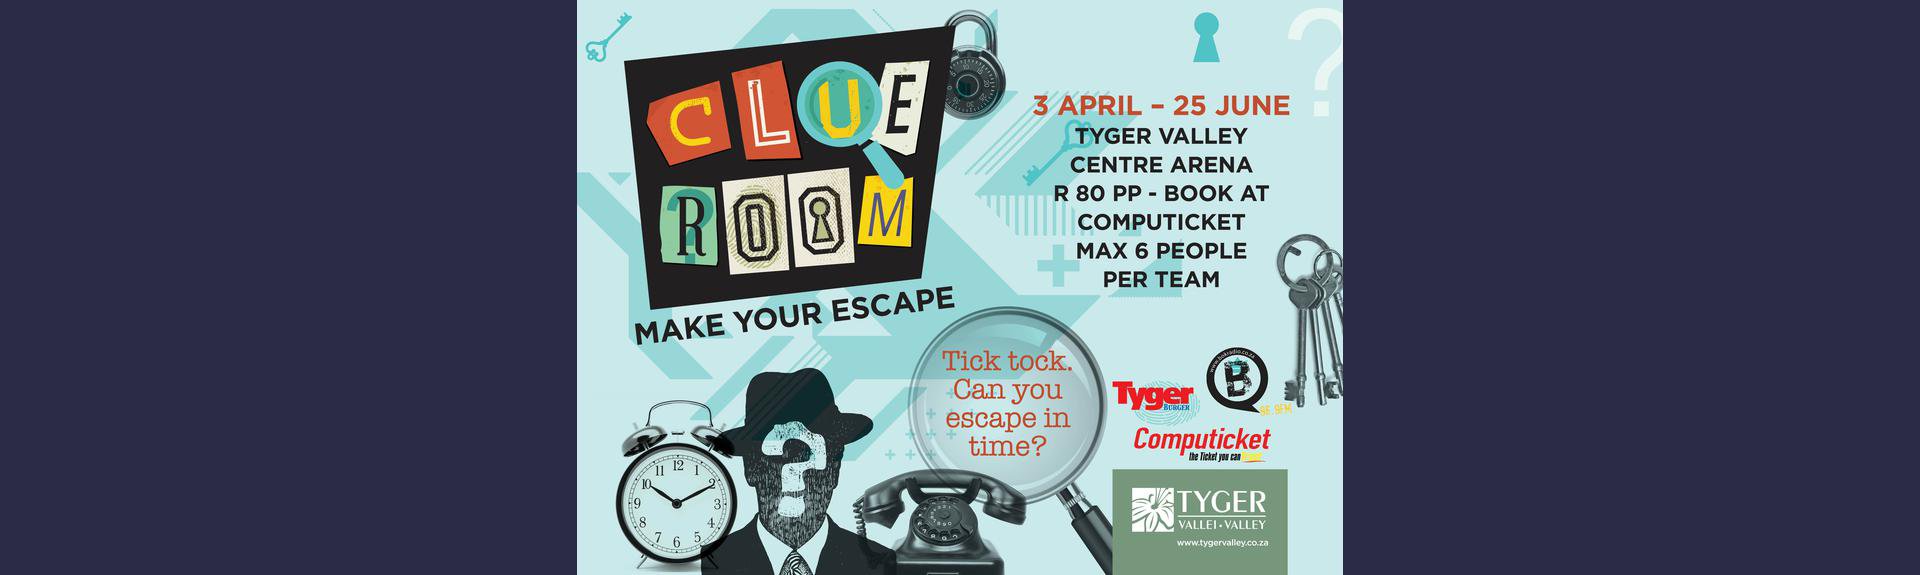 Clue Room, Mystery escape game, do you have what it takes?